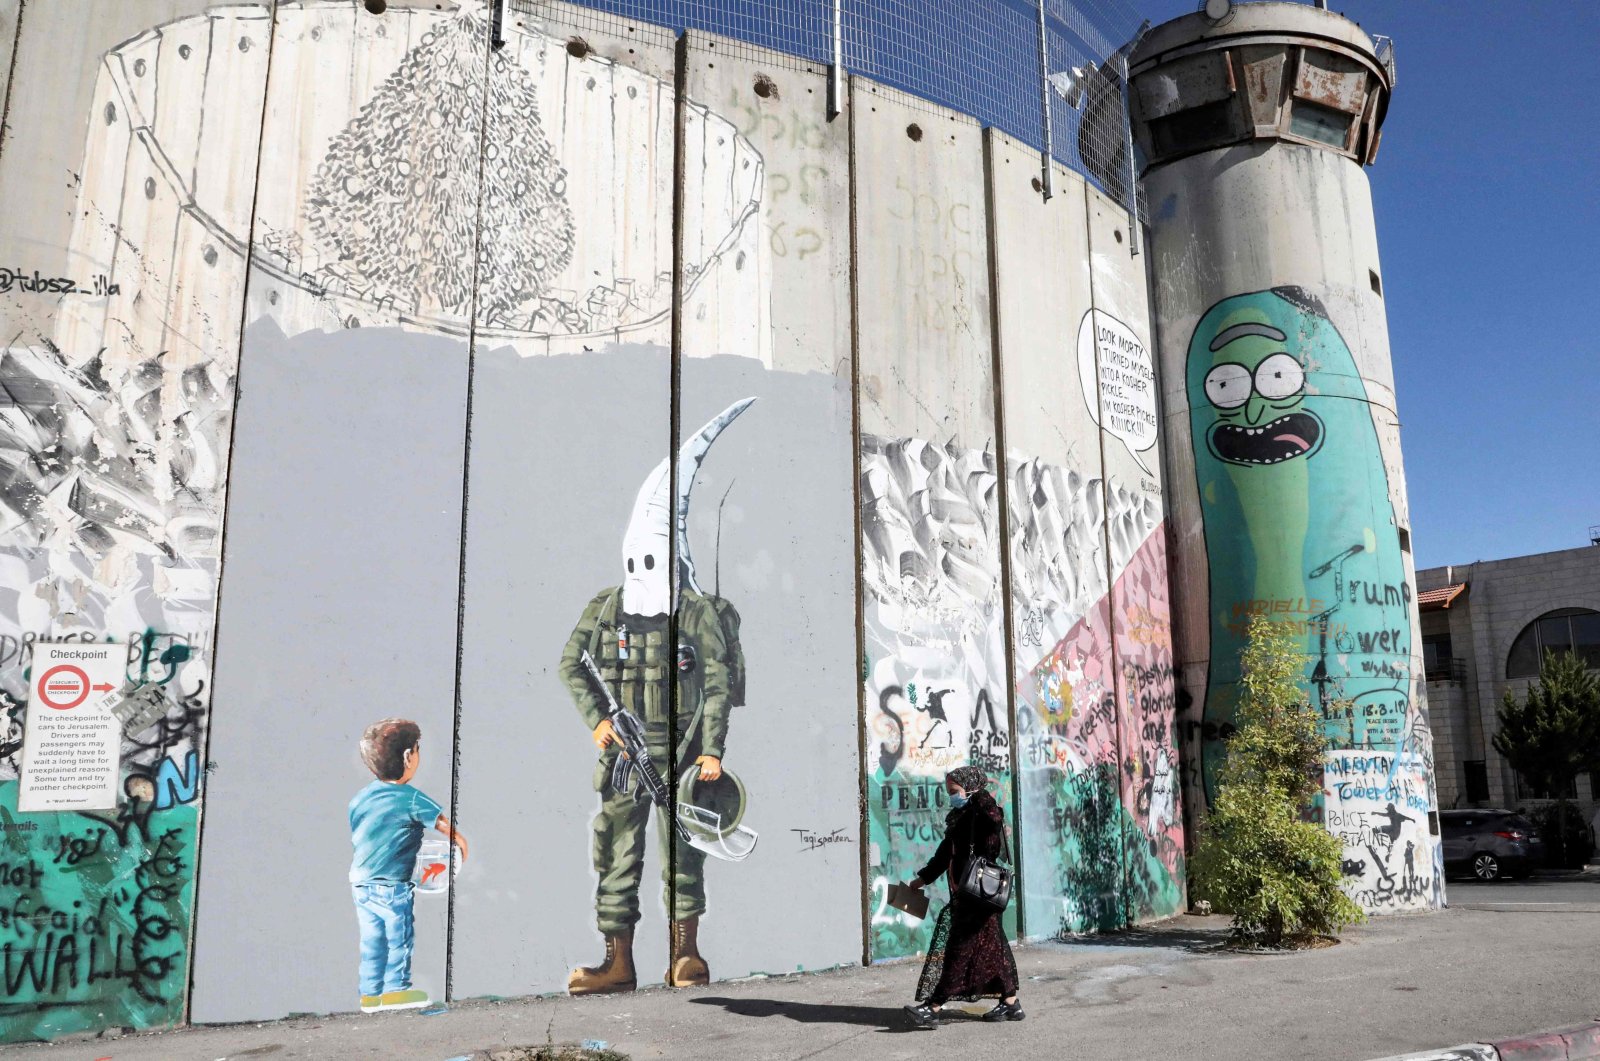 A woman walks past graffiti depicting a boy holding a fishbowl looking at a uniformed Israeli soldier wearing a white hood in the style of the Ku Klux Klan (KKK), drawn by a Palestinian artist along Israel's controversial separation barrier in the city of Bethlehem in the occupied West Bank, Palestine, May 30, 2021. (AFP Photo)